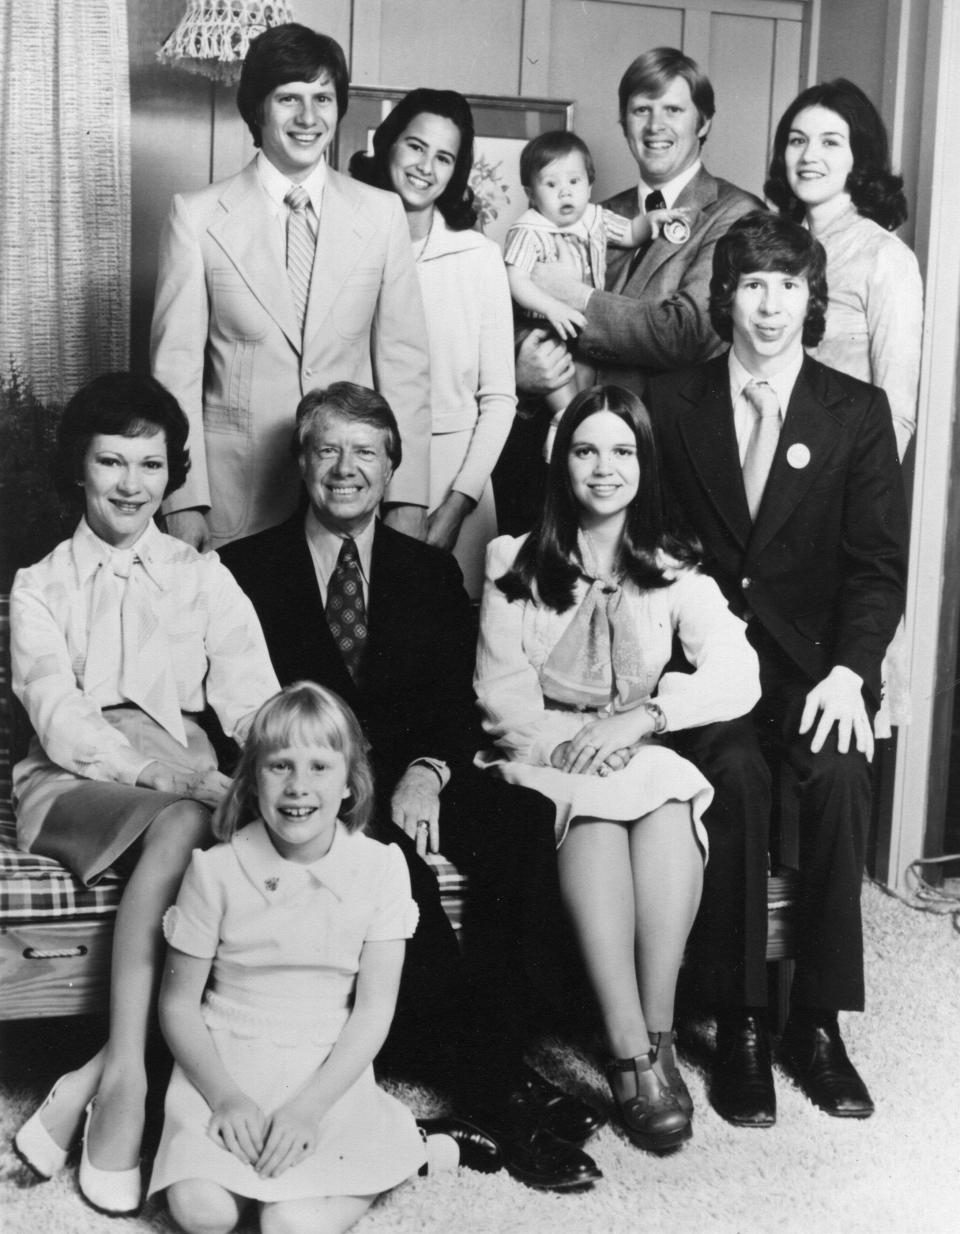 Jimmy Carter and his family in 1976